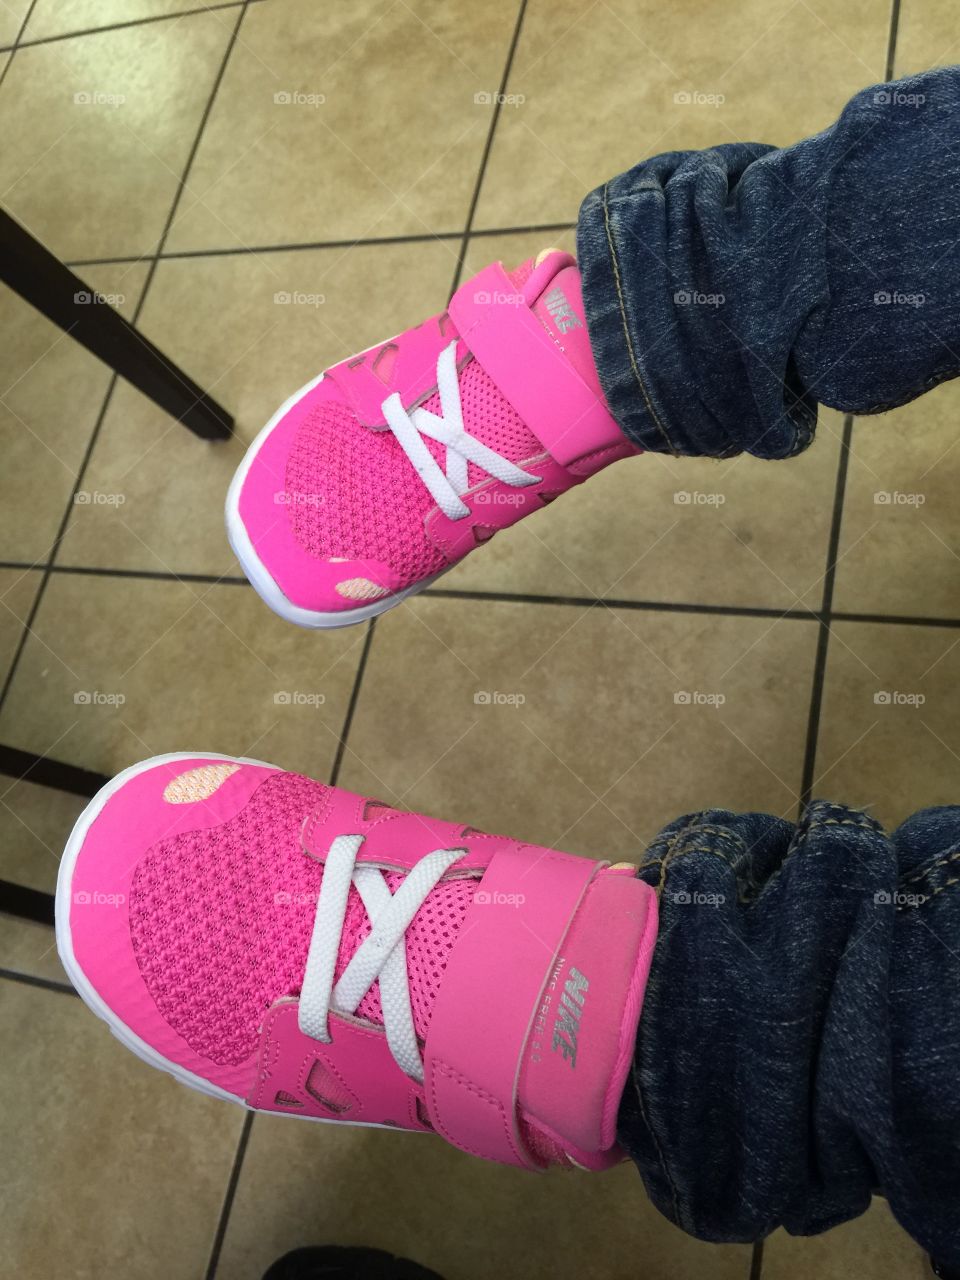 New shoes . New nike shoes my daughter was so excited because they were pink and comfortable 